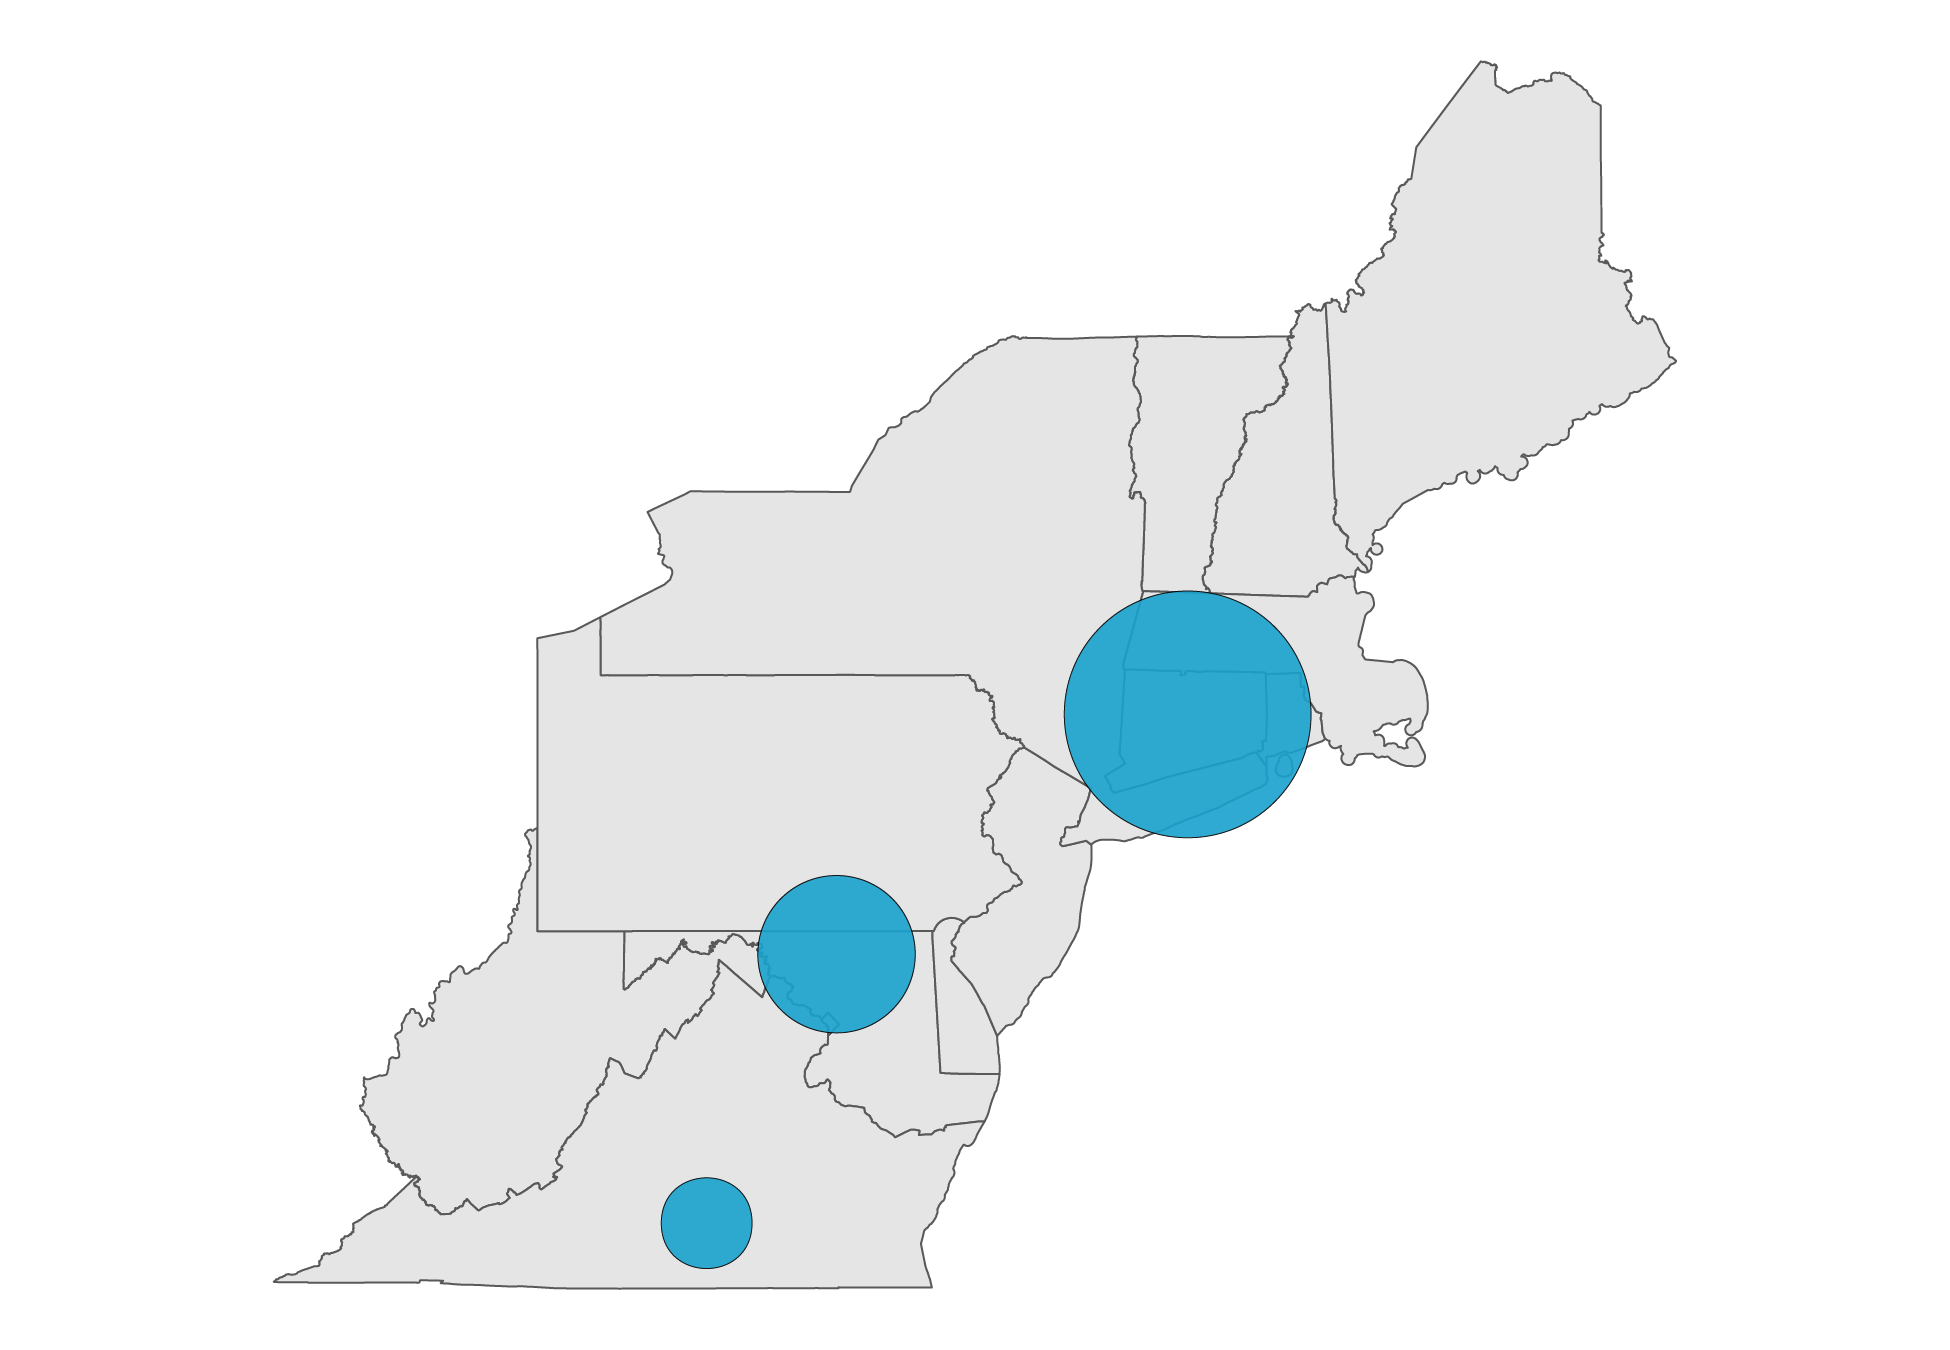 A map of the Northeast region of the United States. There are blue circles over Virginia, Maryland, and Connecticut. The size of the circles represents the size of the property tax revenue gap between Black and White students in that state. Virginia has the smallest circle, representing a gap of $1,294. Maryland has a gap of $2,173. Connecticut has the largest circle, representing a gap of $4,295.